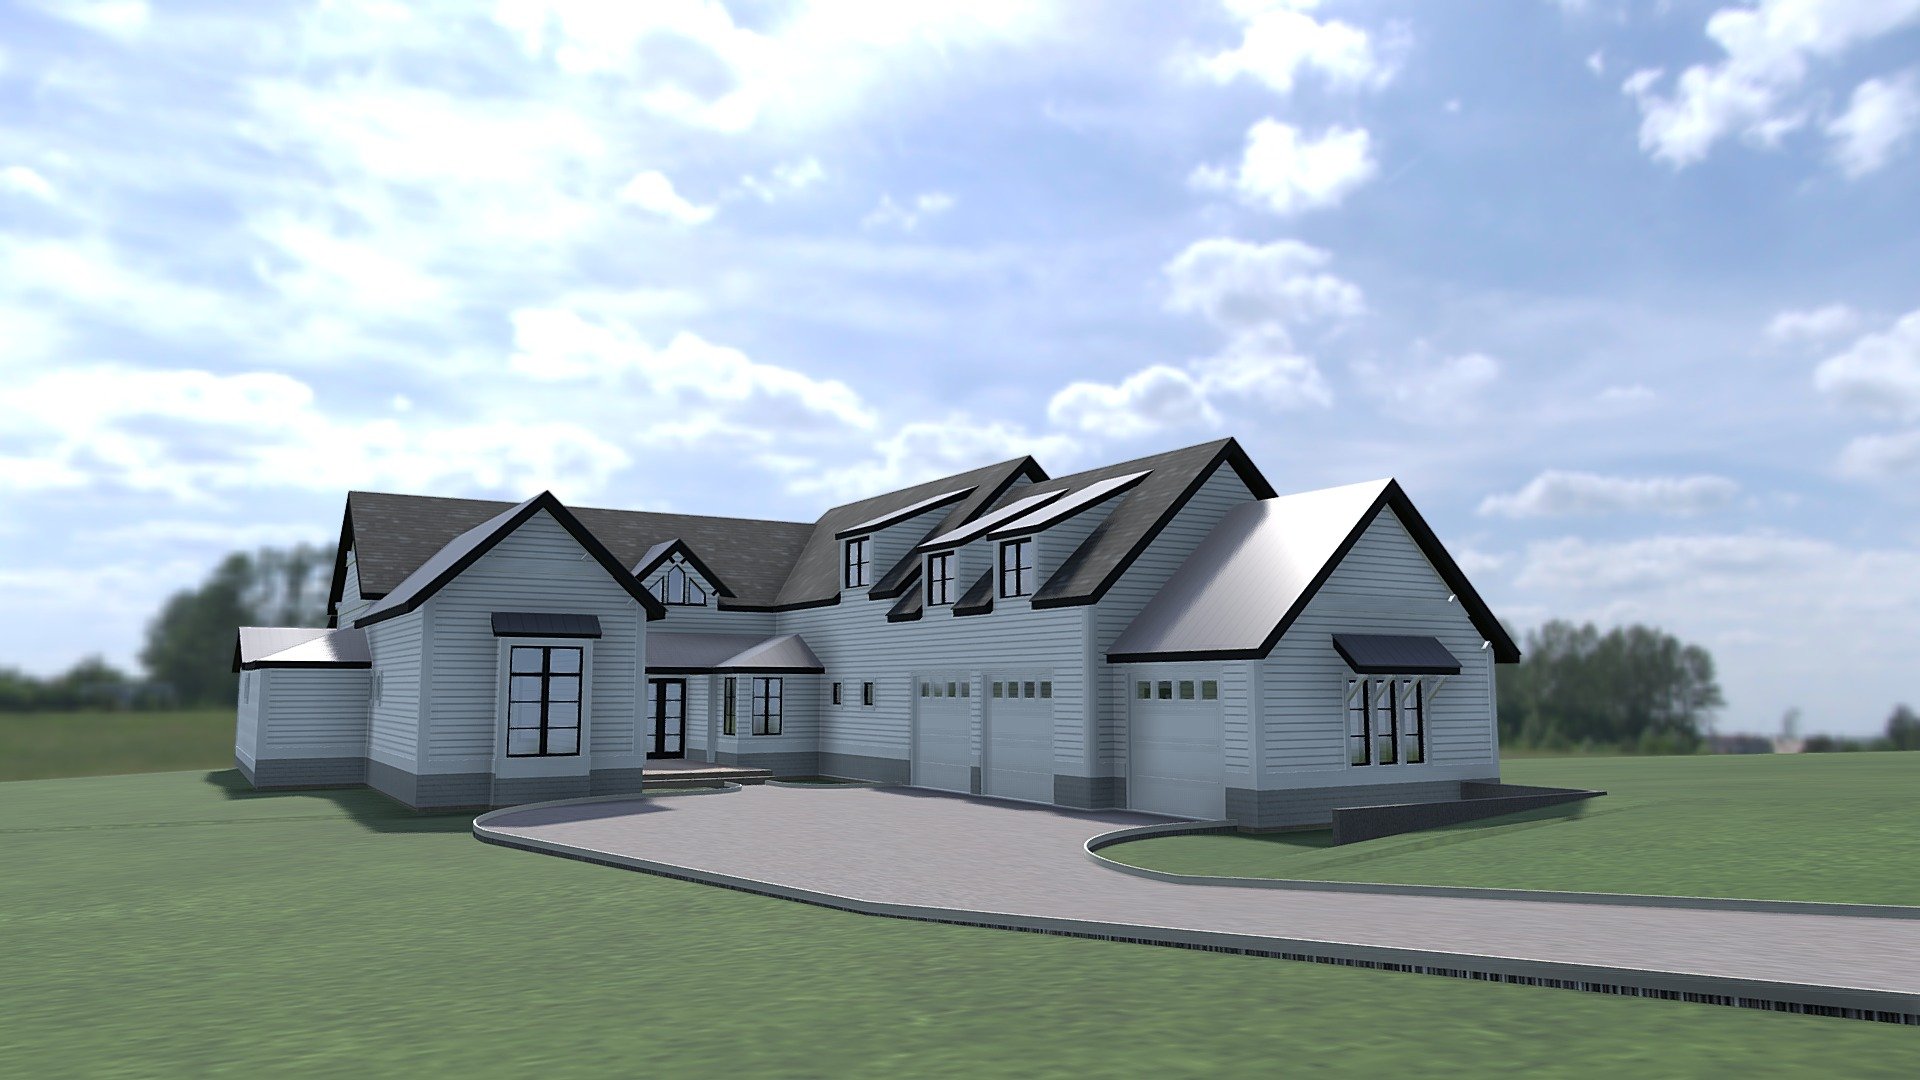 This 360 spin image shows an exterior 3D rendering of a single storey house. It is set on a natural backdrop with a clear sky and natural lighting. The interactive 360 spin functionality allows our clients to rotate the model through 360 degrees and look at it from any angle, including looking at the property from above or below.

To get a quote for a 360 spin model or architectural rendering project call us direct on 1-877-350-3490.

To see a wide range of different 3D renderings we have completed for clients, check out our Instagram page: https://www.instagram.com/render3dquick/




360 spin

360 spin image

Interactive 360 spin

360 spin model

360 floor plan

360 floor plan spin

360 exterior spin

360 interior spin

360 tour

360 spin tour

360 degree spin tour

360 exterior tour

360 model

360 fly around tour

360 rendering
 - Mike Phillips - 360 spin model of 3D house - 3D model by Render3DQuick 3d model